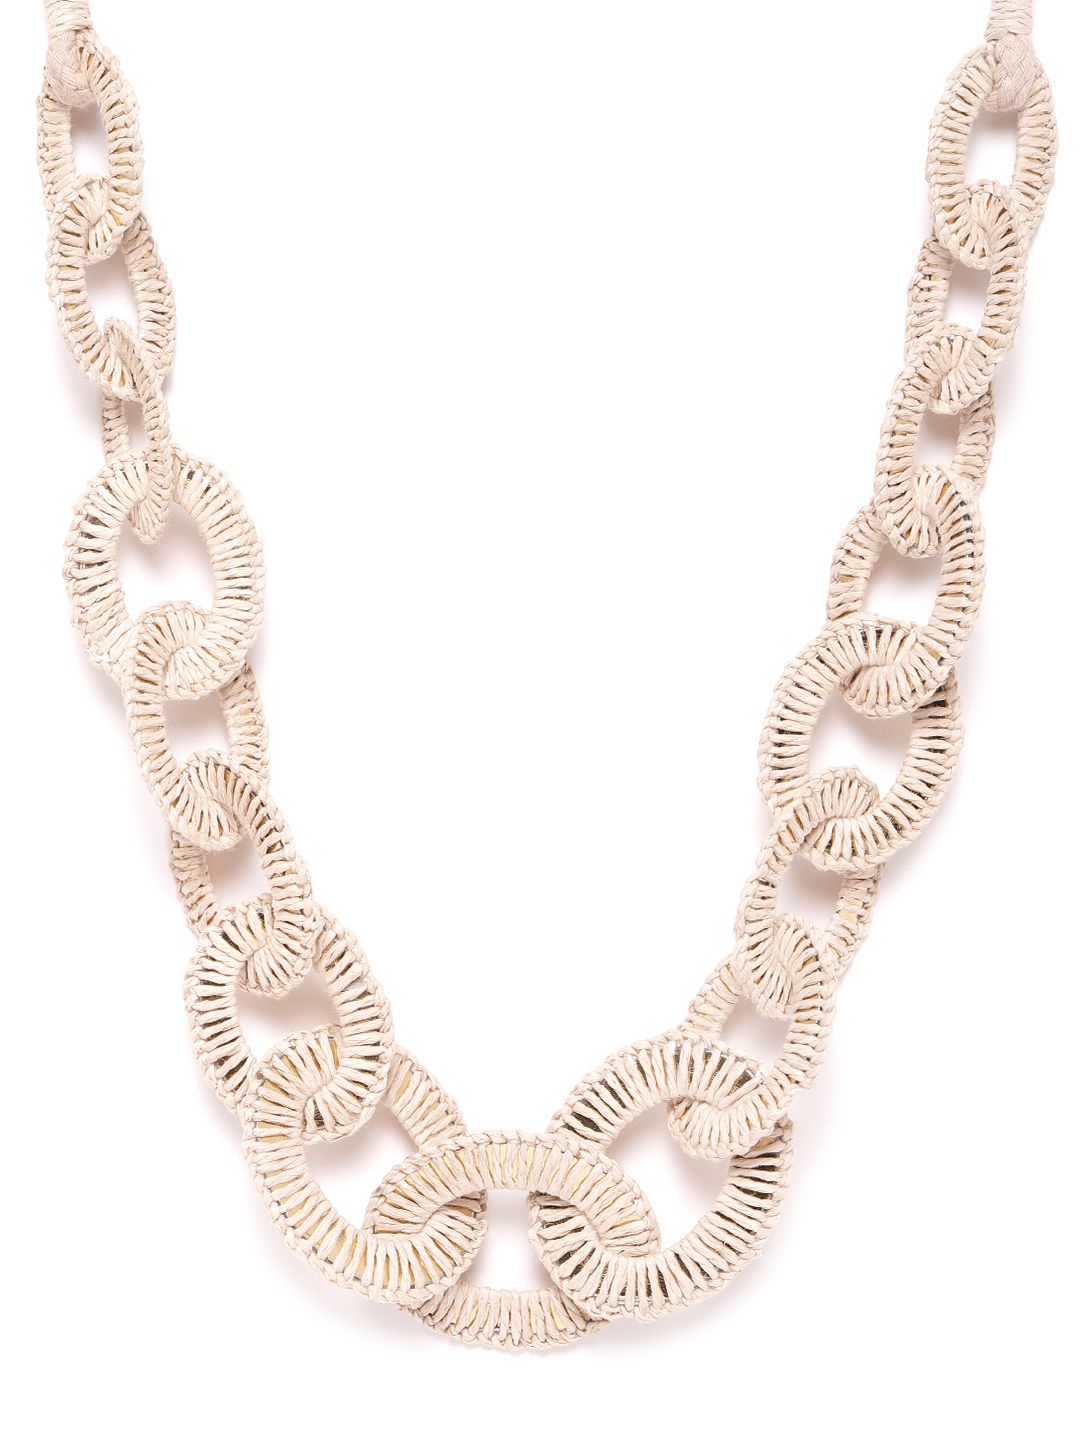 RICHEERA Women Beige & Gold-Toned Woven Design Necklace Price in India